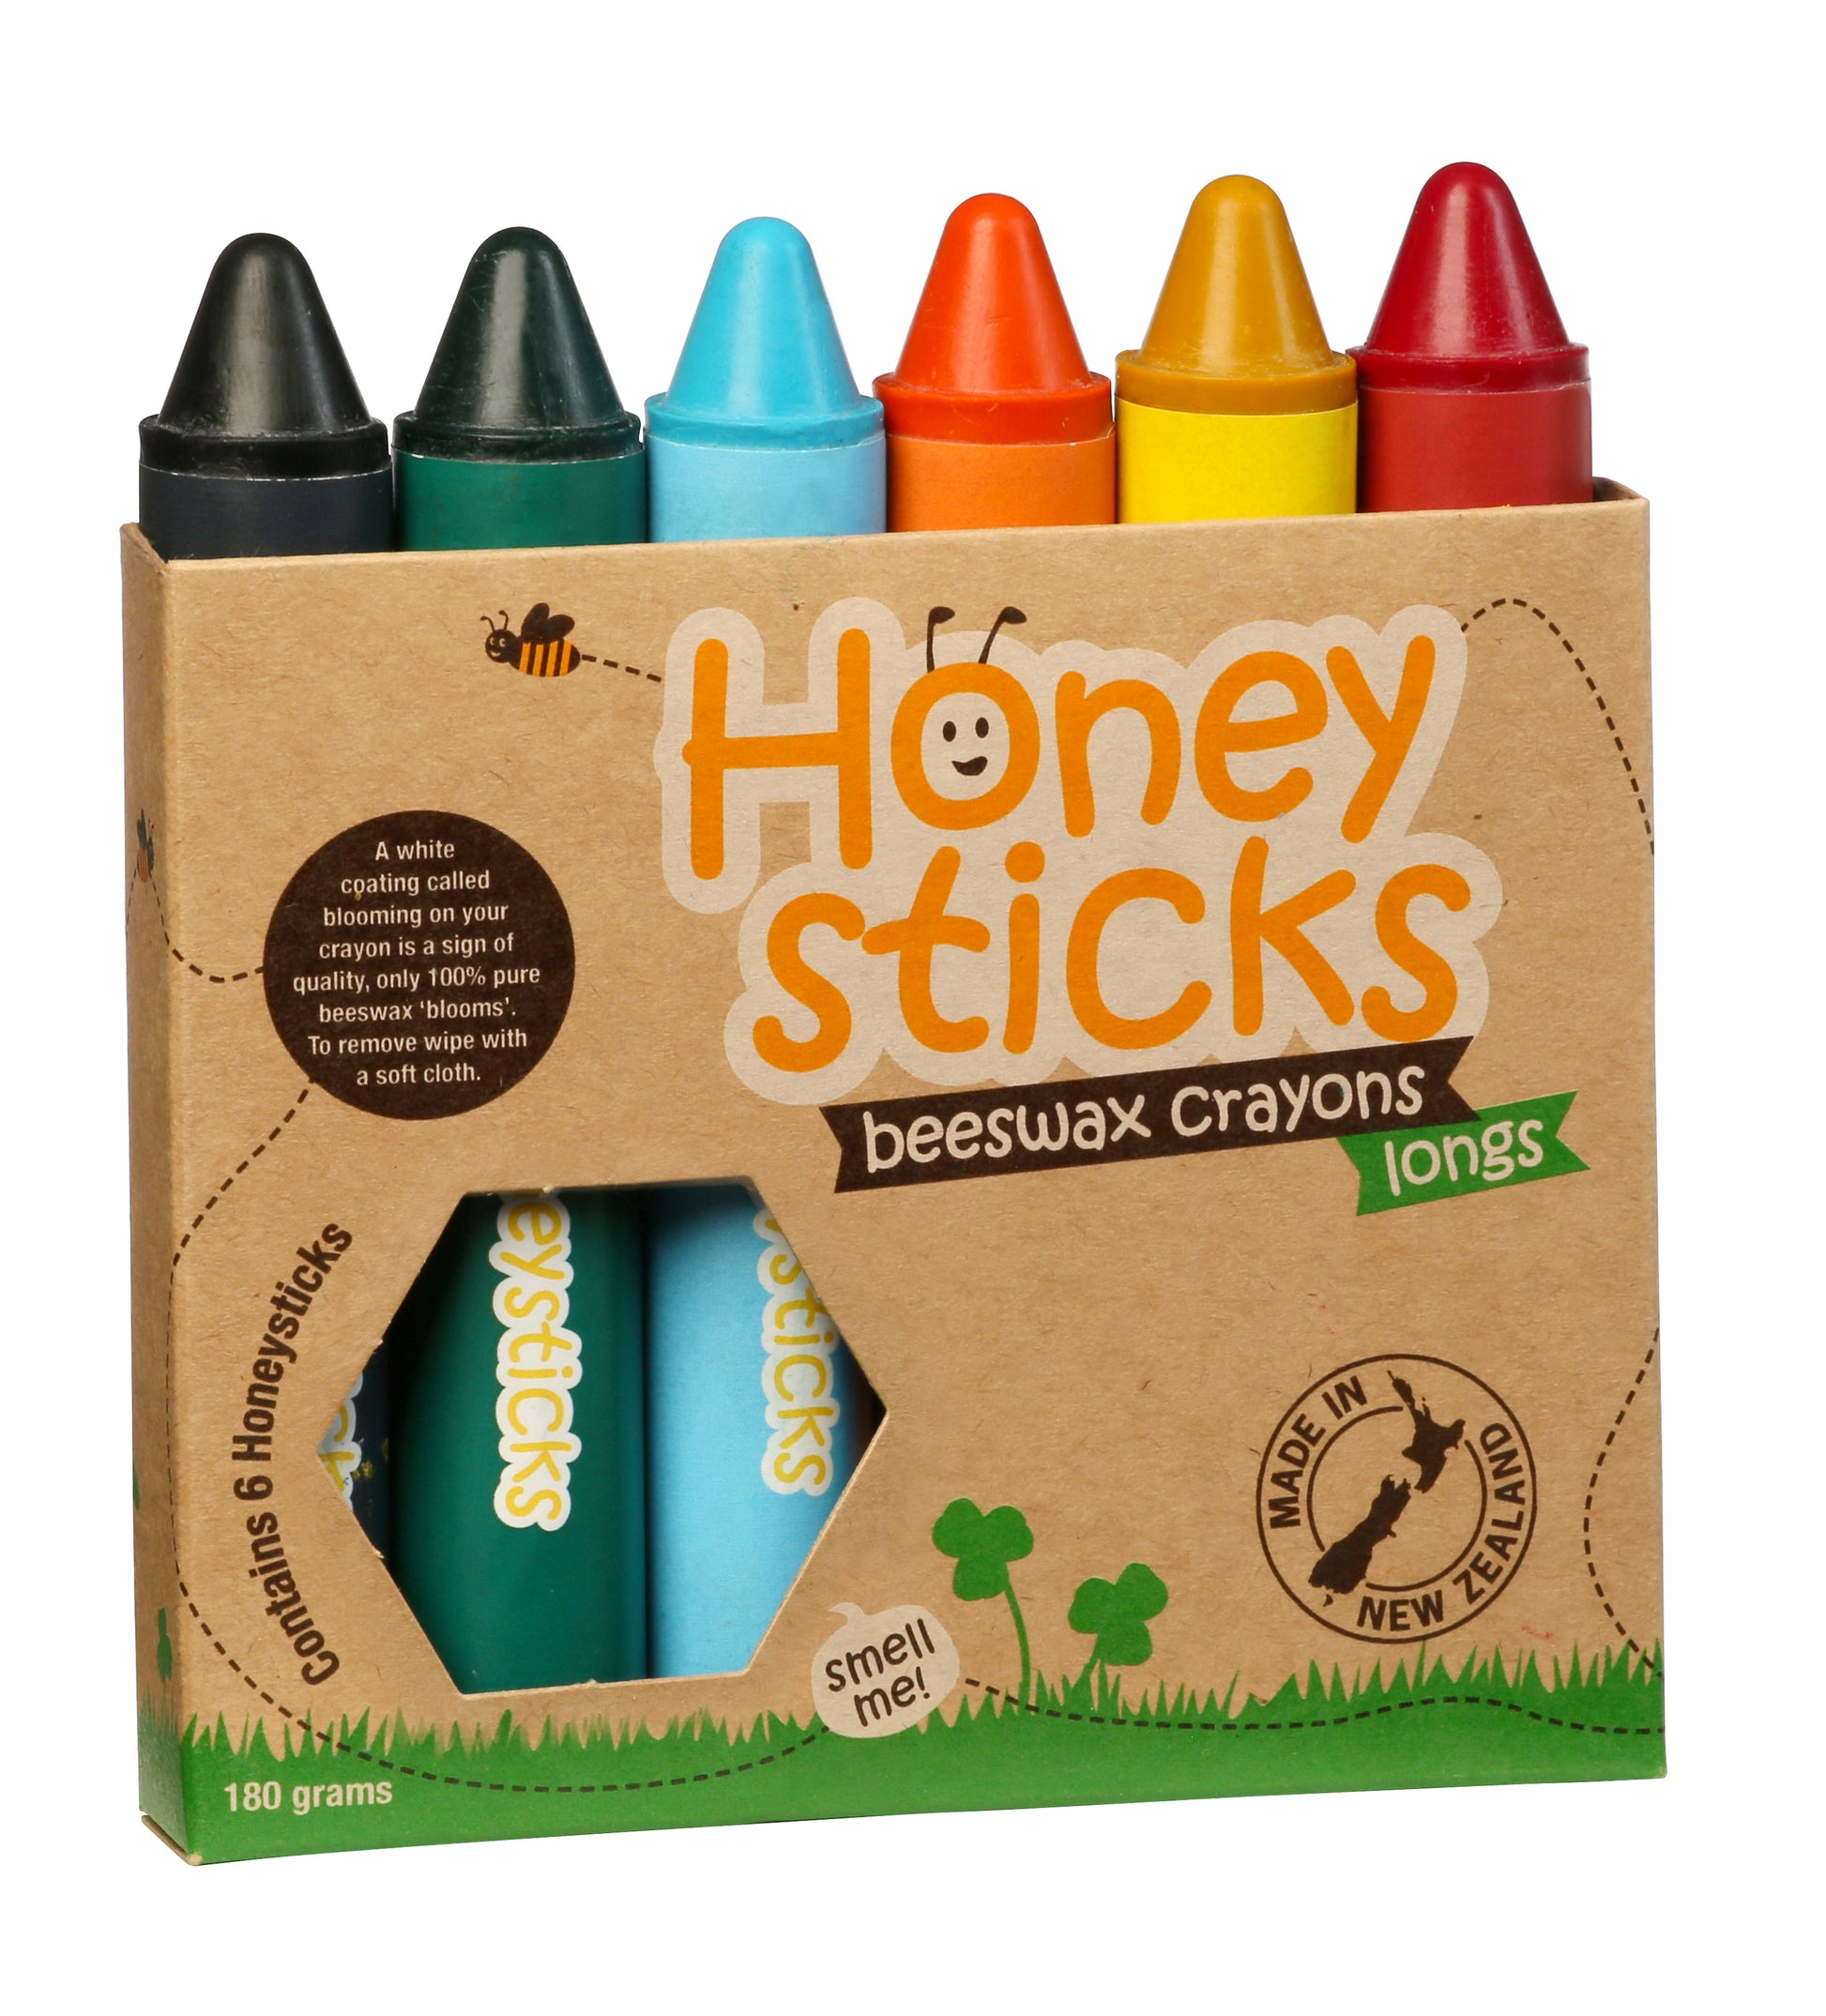 Beeswax Crayons Longs (3-5 yr) - Little Reef and Friends